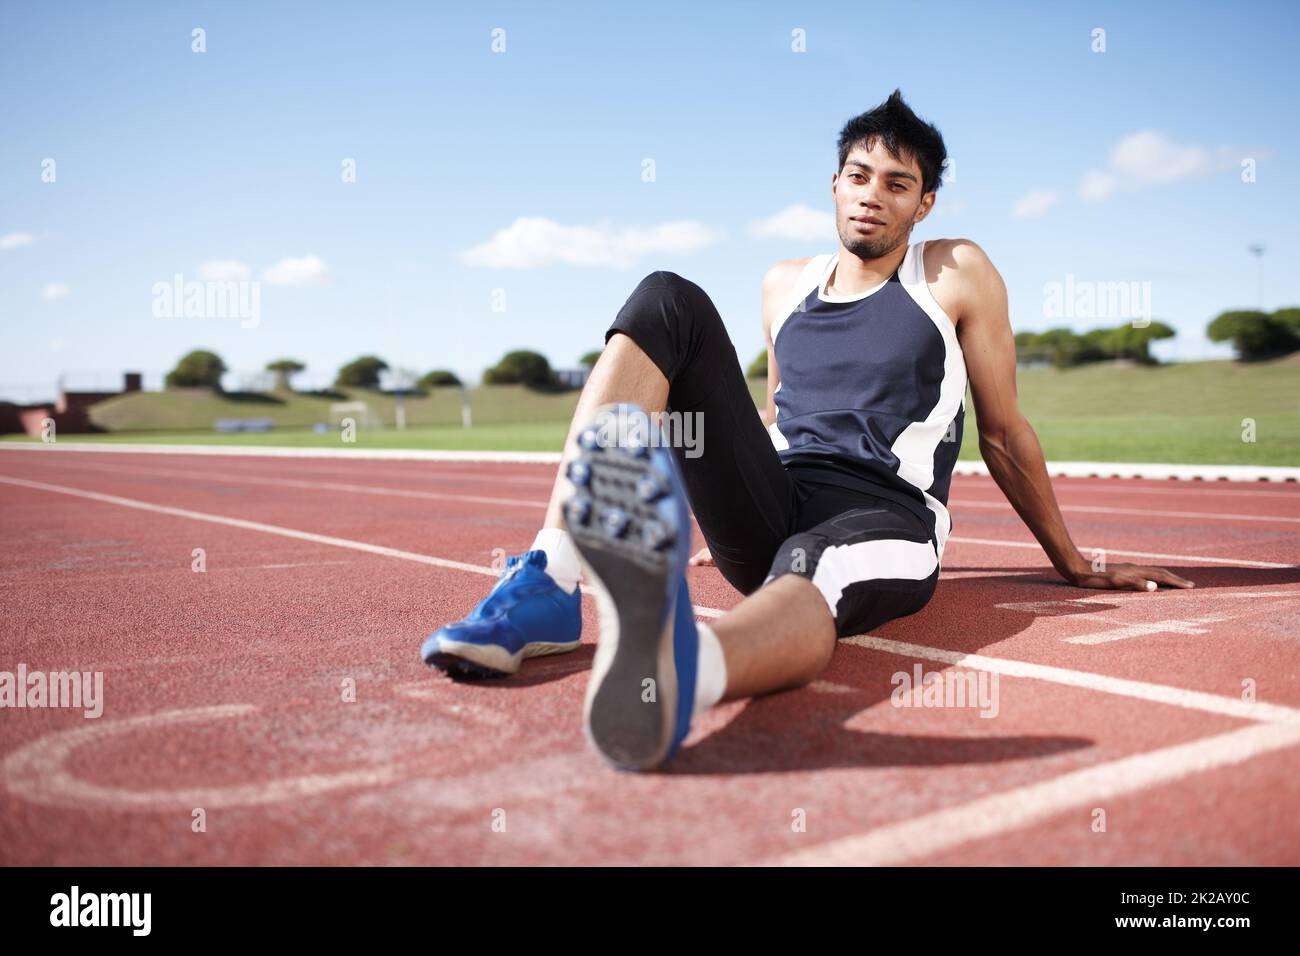 This is my turf. A young athlete leaning back on a running track. Stock Photo